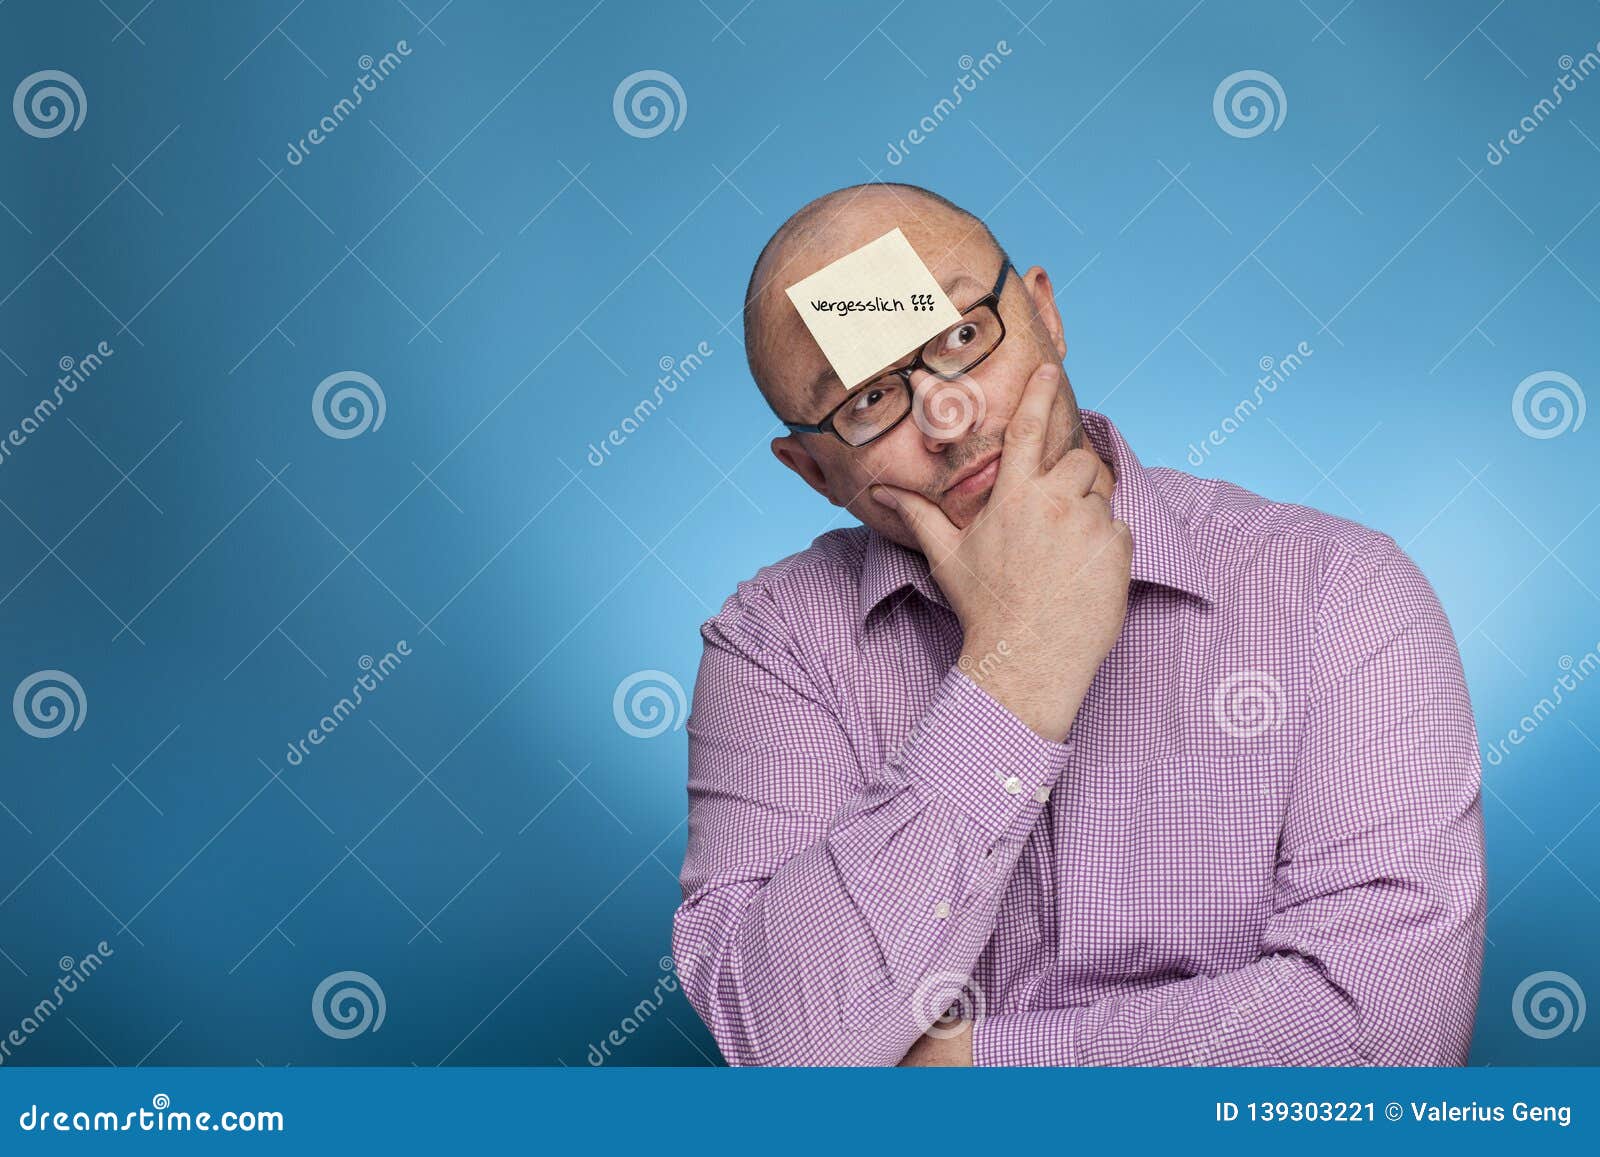 a businessman in a piked shirt has a blank post it on the forehead with german word vergesslich